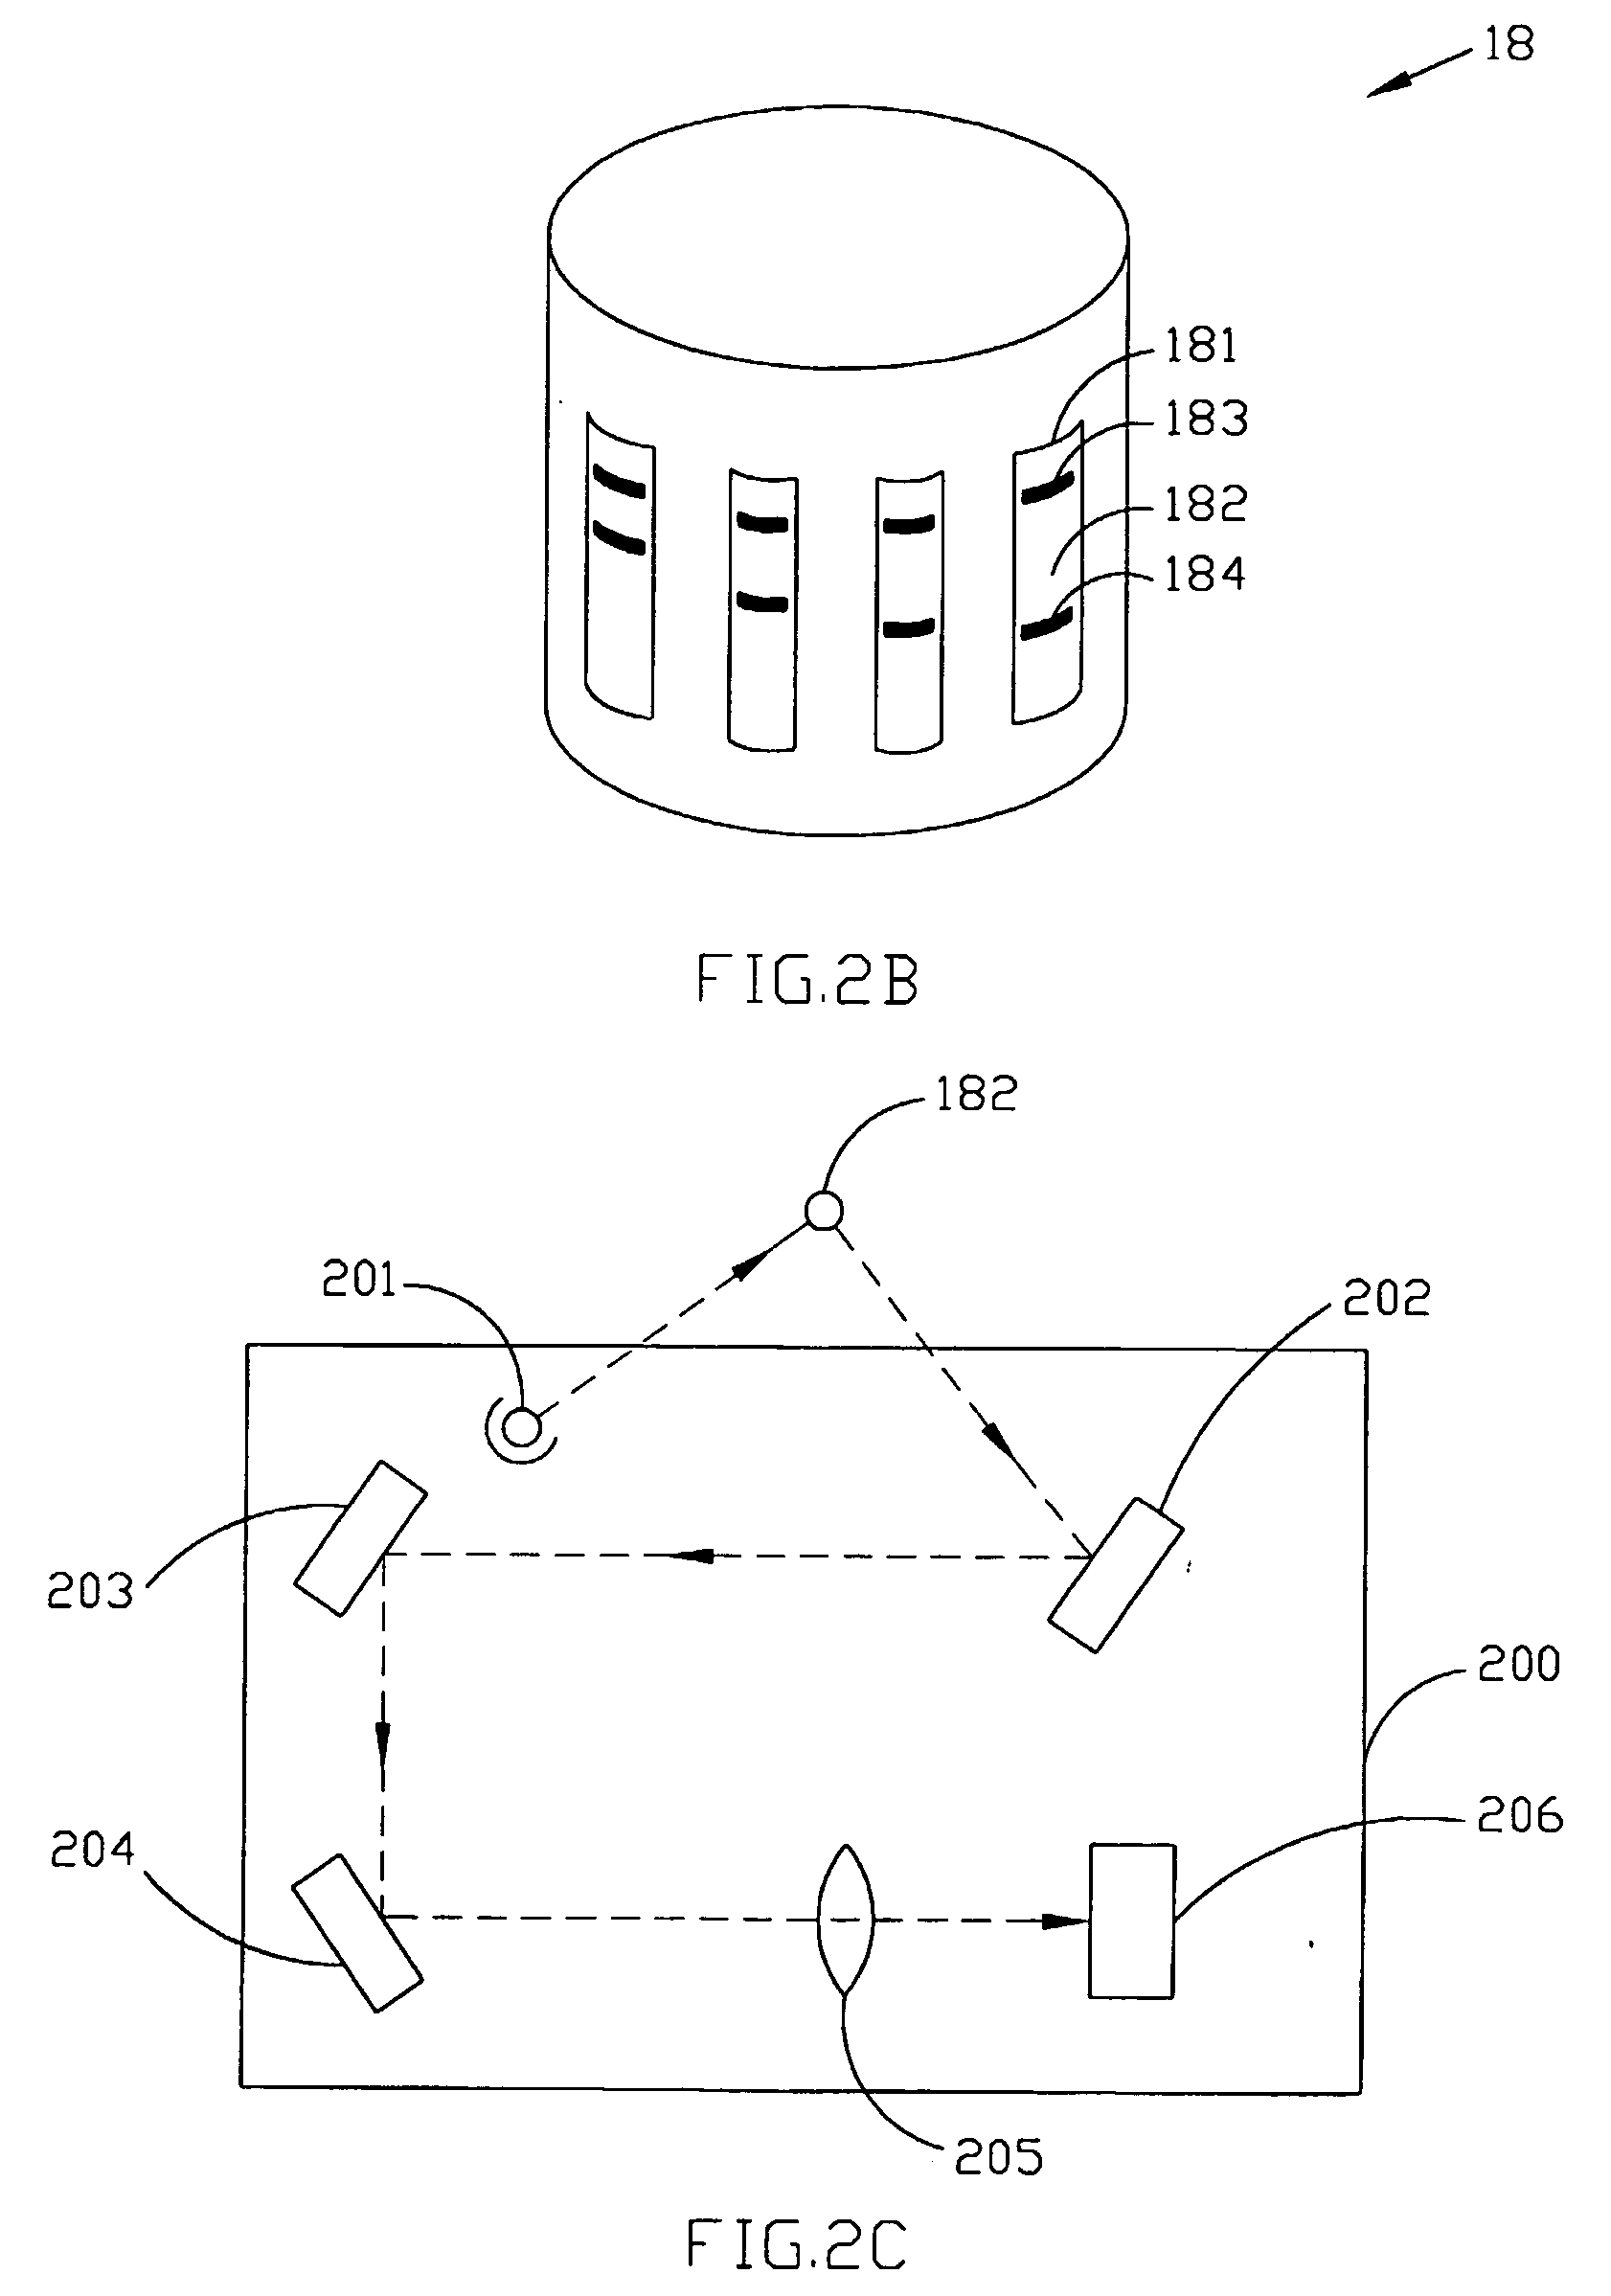 Apparatus for monitoring specific substances in a fluid